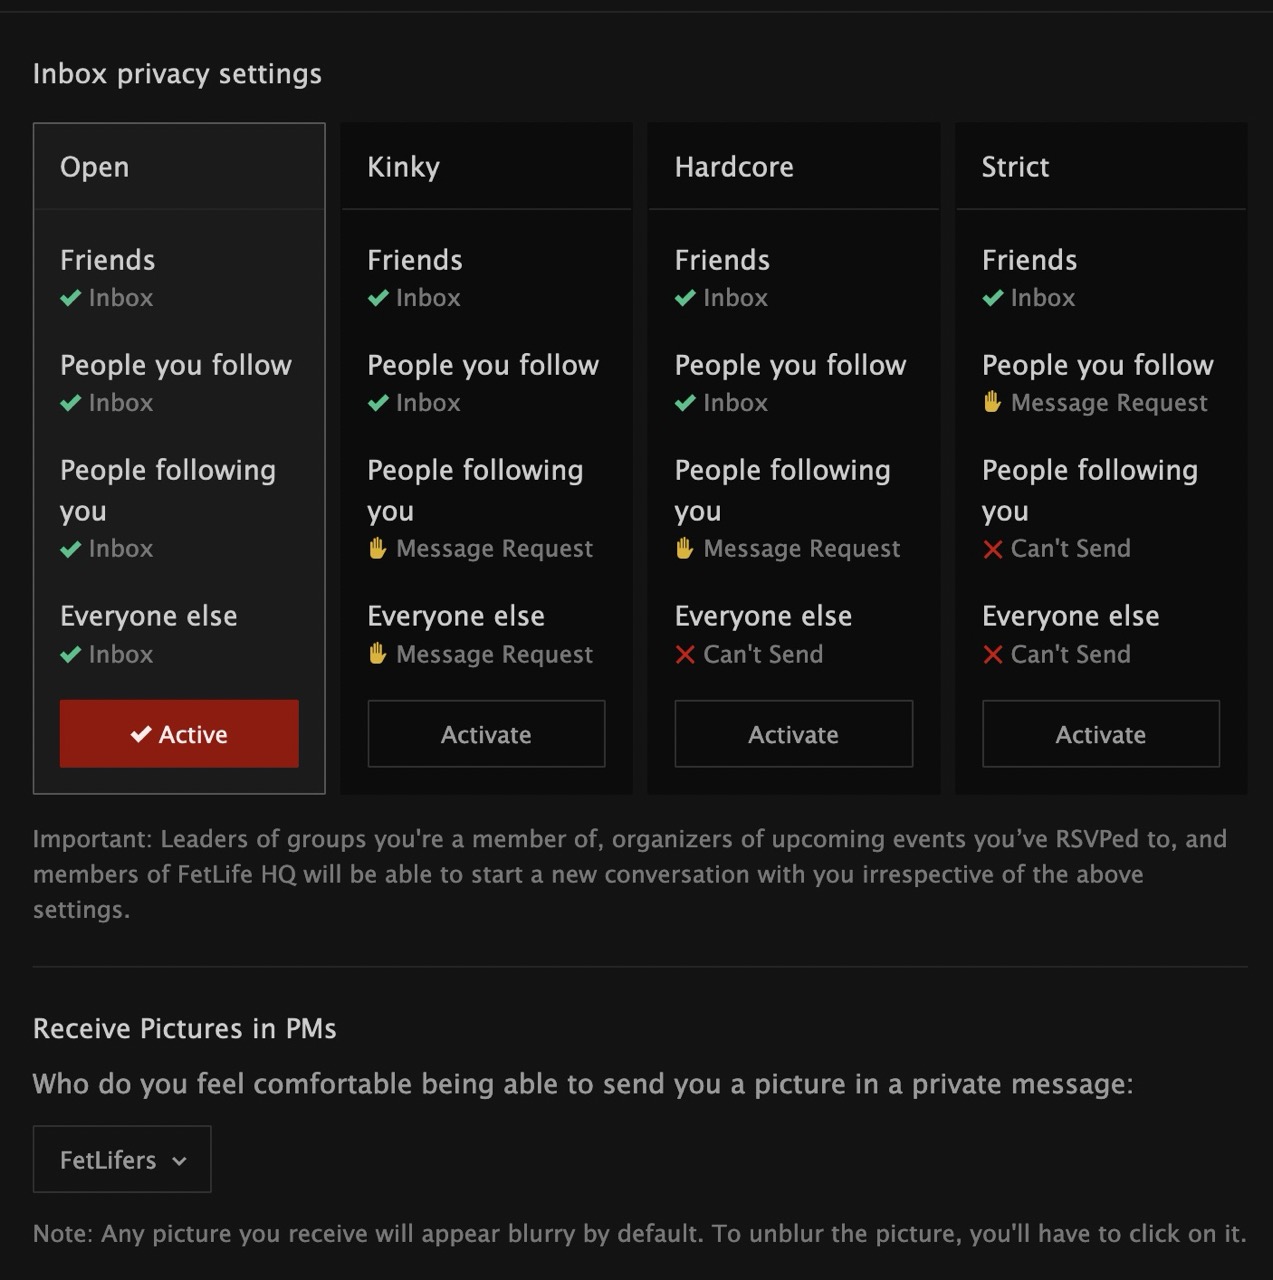 fetlife-review-inbox-privacy